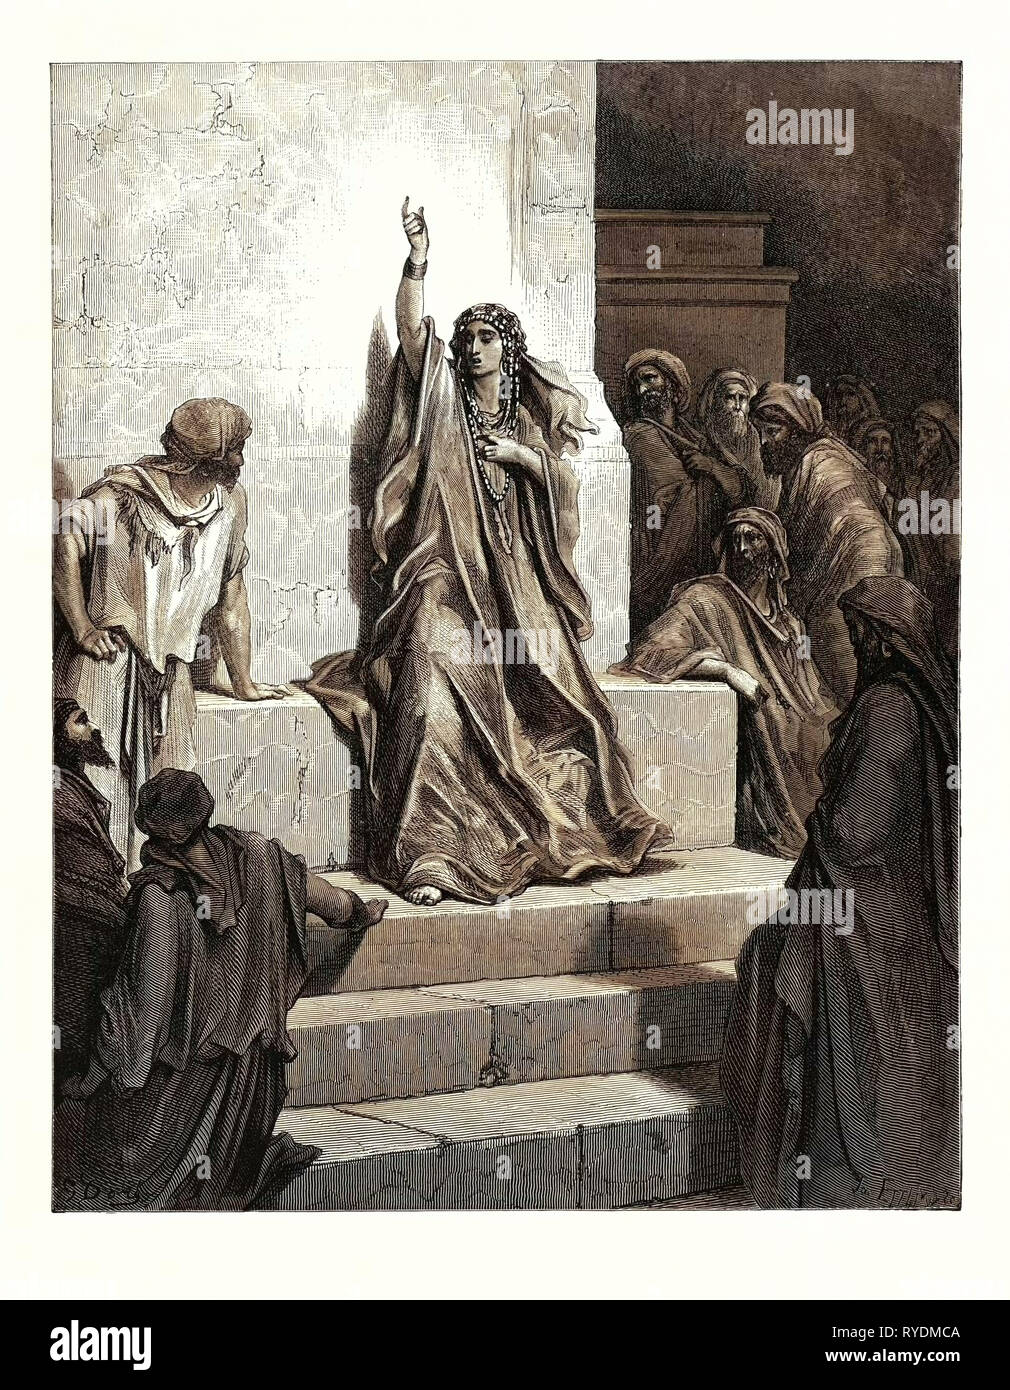 Deborah, by Gustave Doré, 1832 - 1883, French. Engraving for the Bible. 1870, Art, Artist, Holy Book, Religion, Religious, Christianity, Christian, Romanticism, Colour, Color Engraving Stock Photo